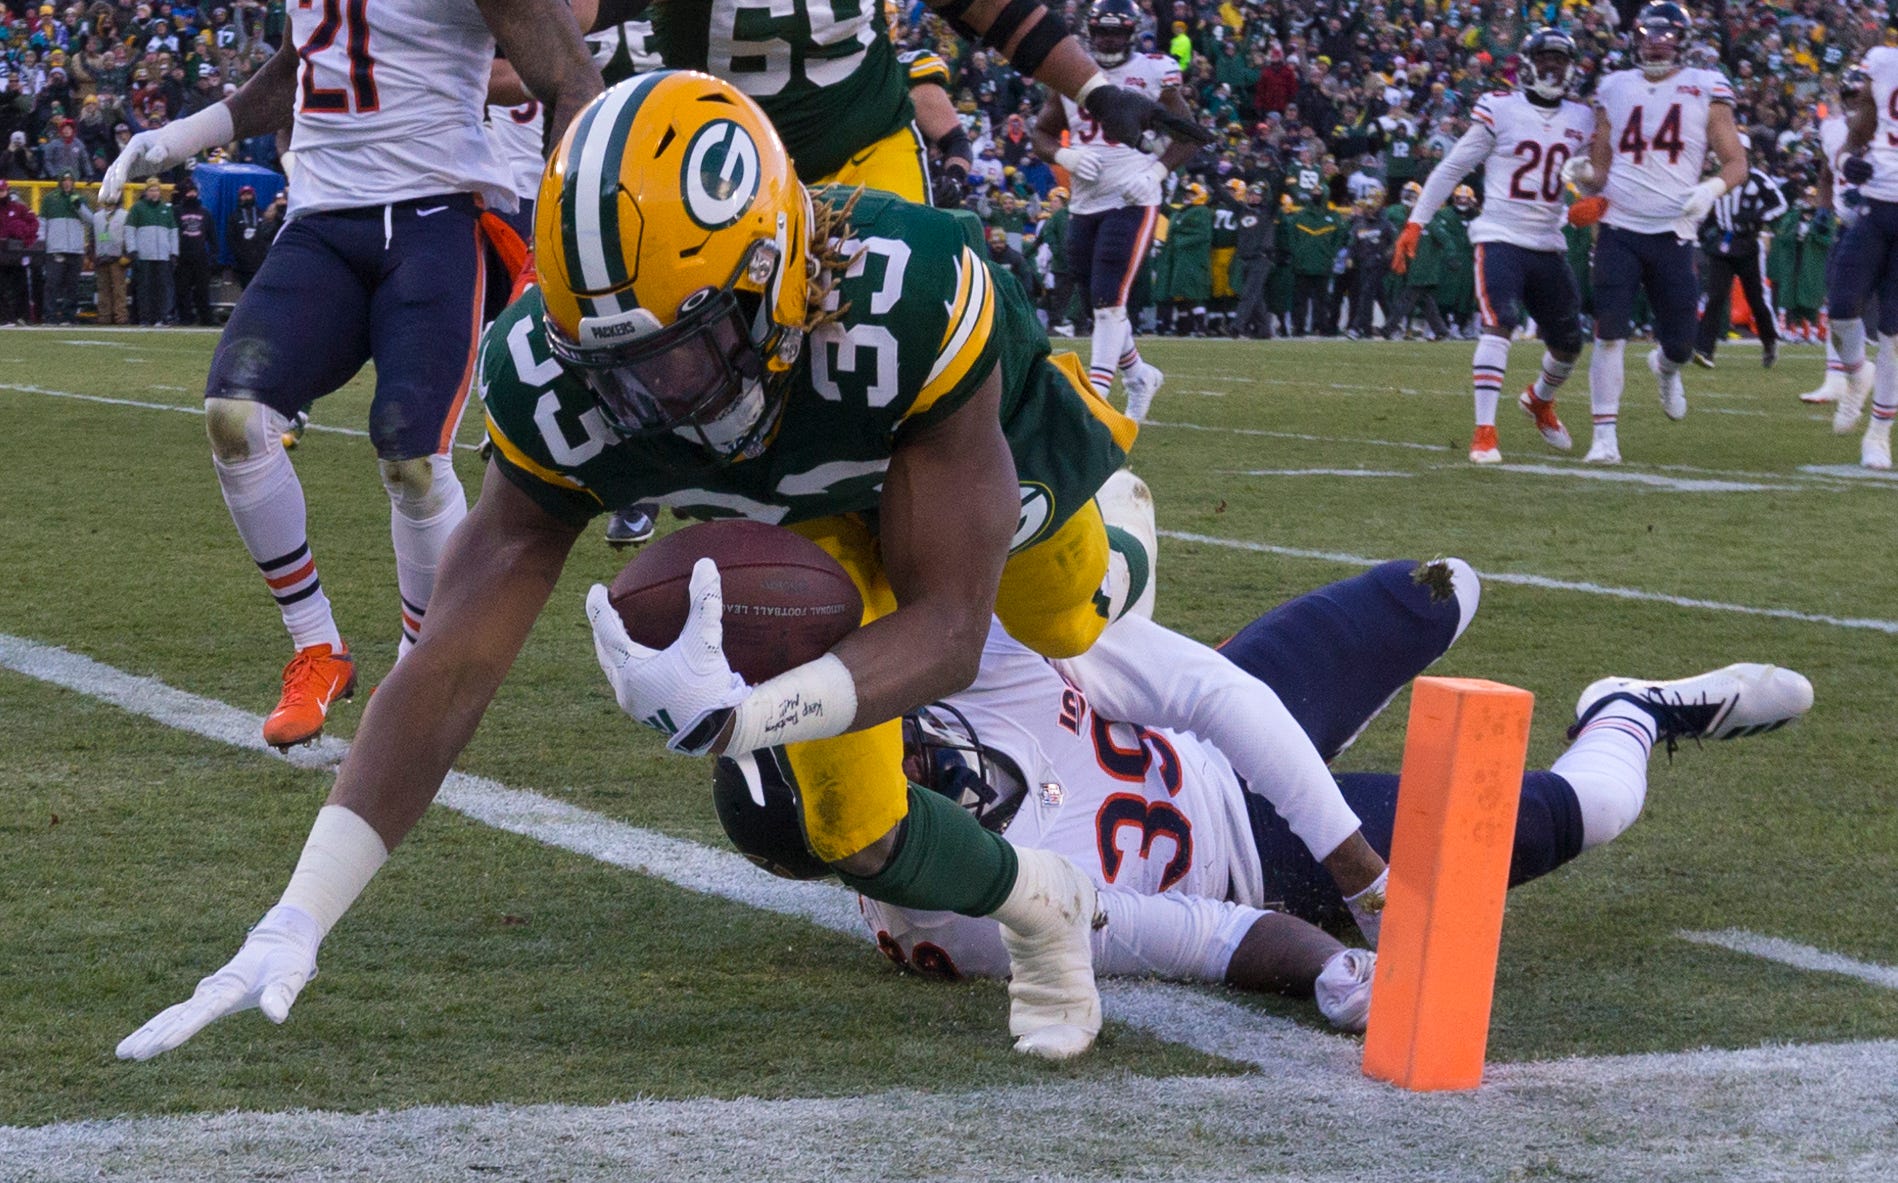 Green Bay Packers running back Aaron Jones (33) scores touchdown on a 21-yard run despite the efforts of Chicago Bears free safety Eddie Jackson (39) during the third quarter of their game Sunday, December 15, 2019 at Lambeau Field in Green Bay, Wis. The Green Bay Packers beat the Chicago Bears 21-13.